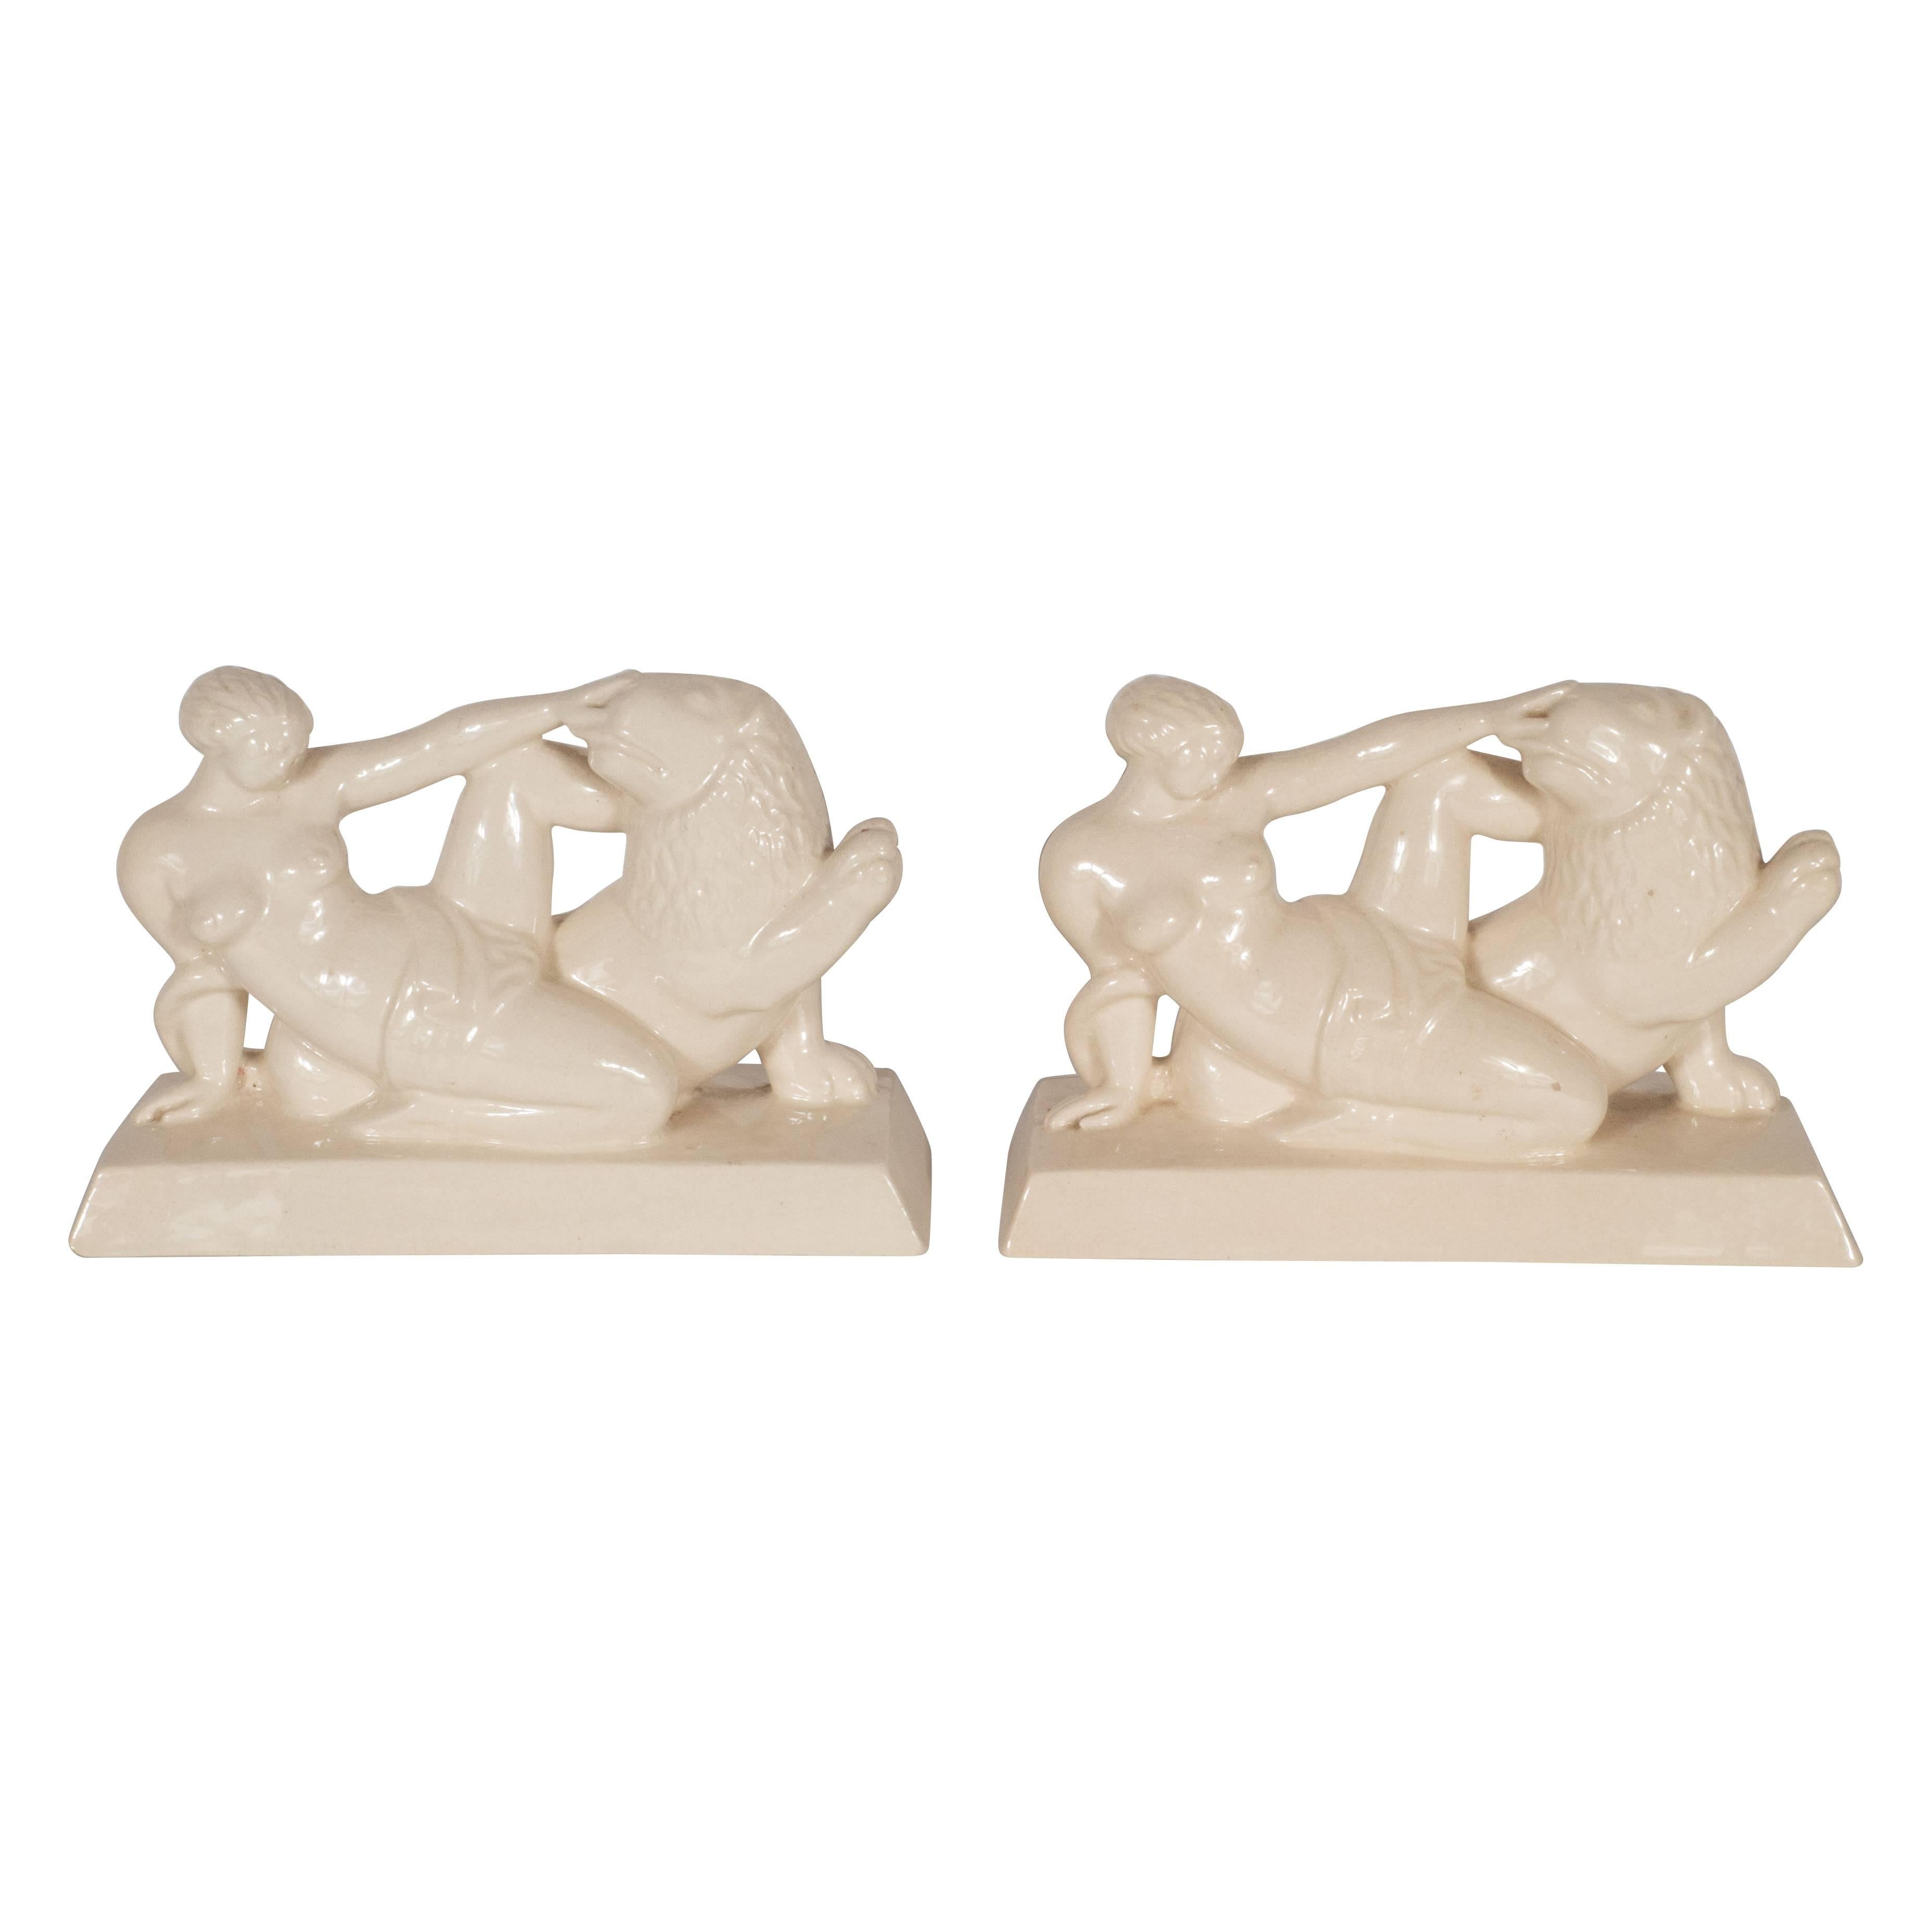 Art Deco Ceramic Book Ends Featuring Lion and Nude Female Figure For Sale